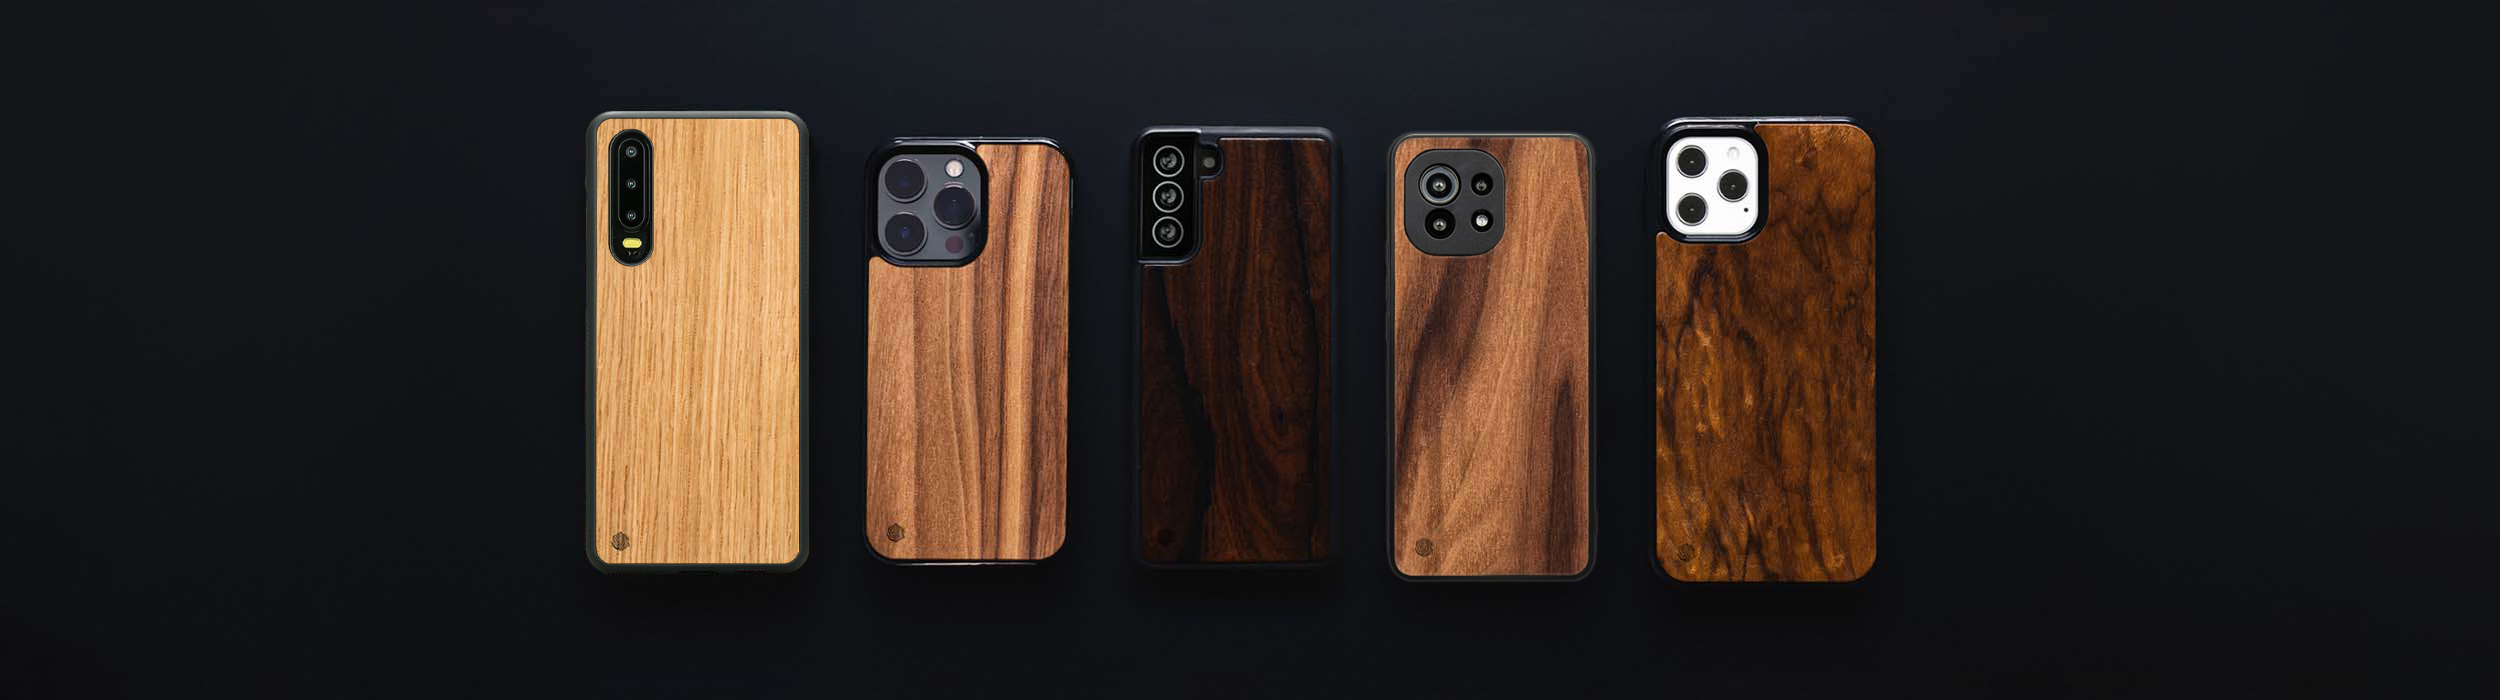 Huawei Mate 30 Pro Wooden Phone Cases